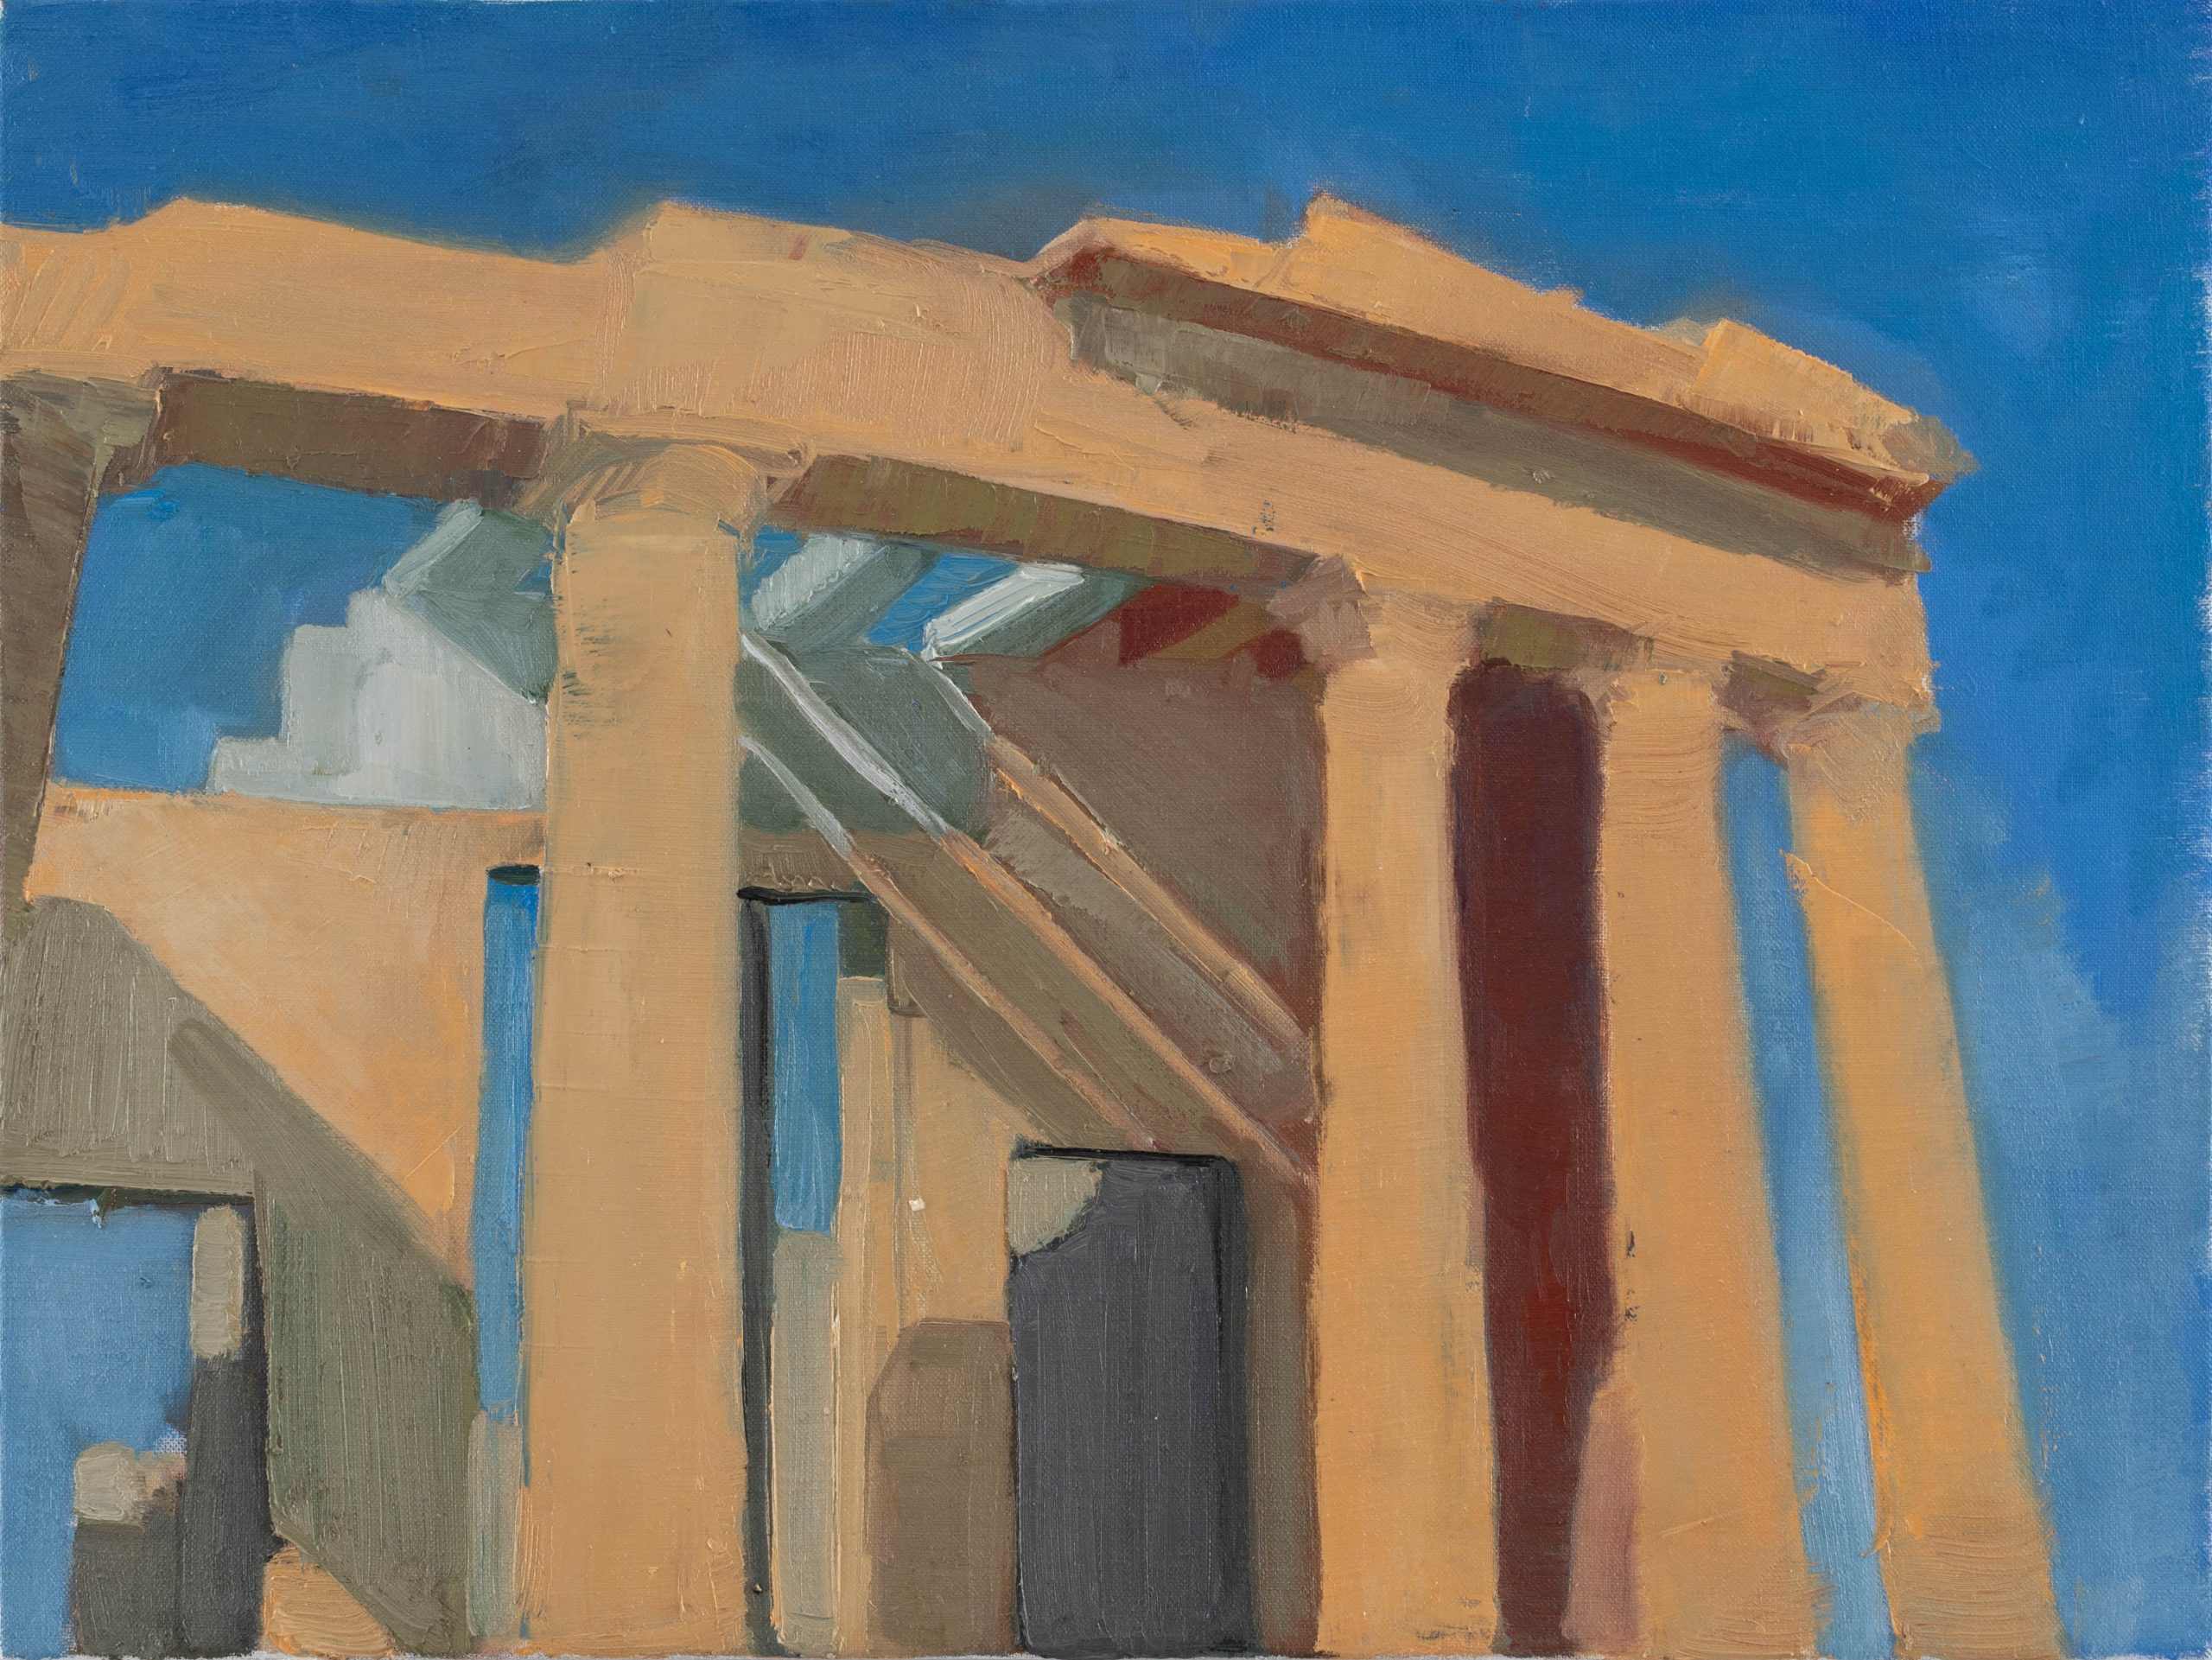 Anna's painting of the Propylaea on the Acropolis.